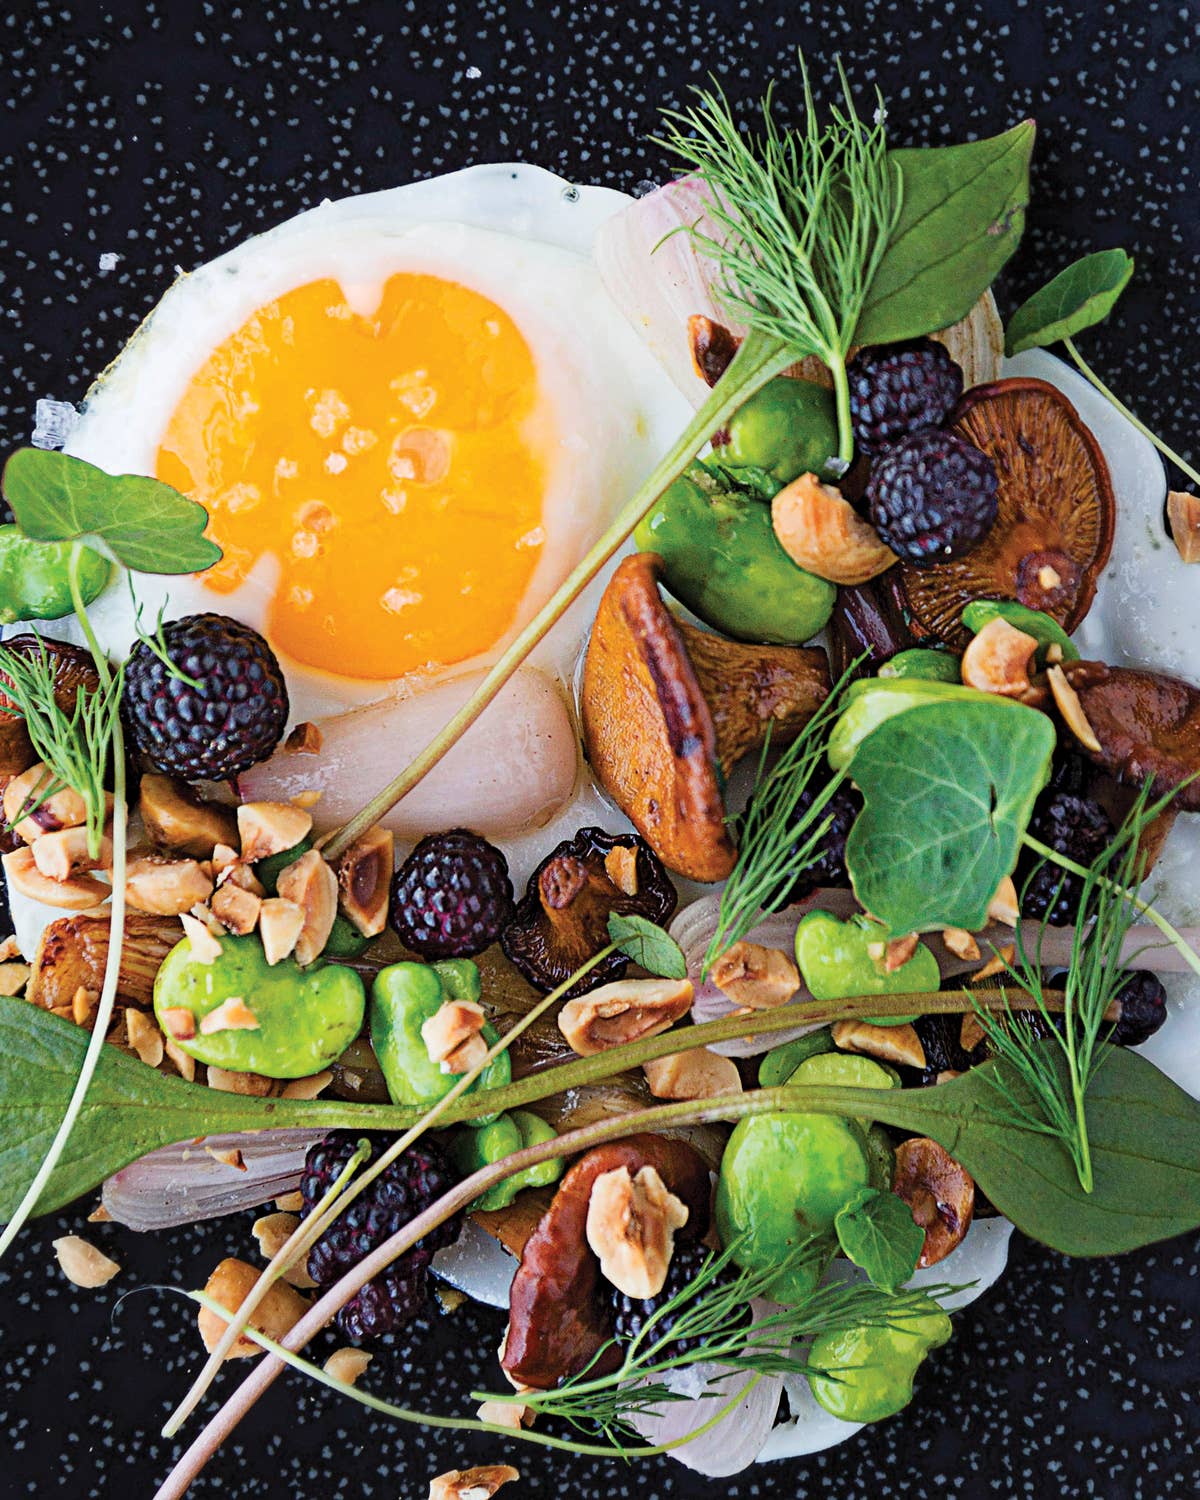 Fried Egg with Hazelnuts, Chanterelles, Green Garlic, and Blackberries